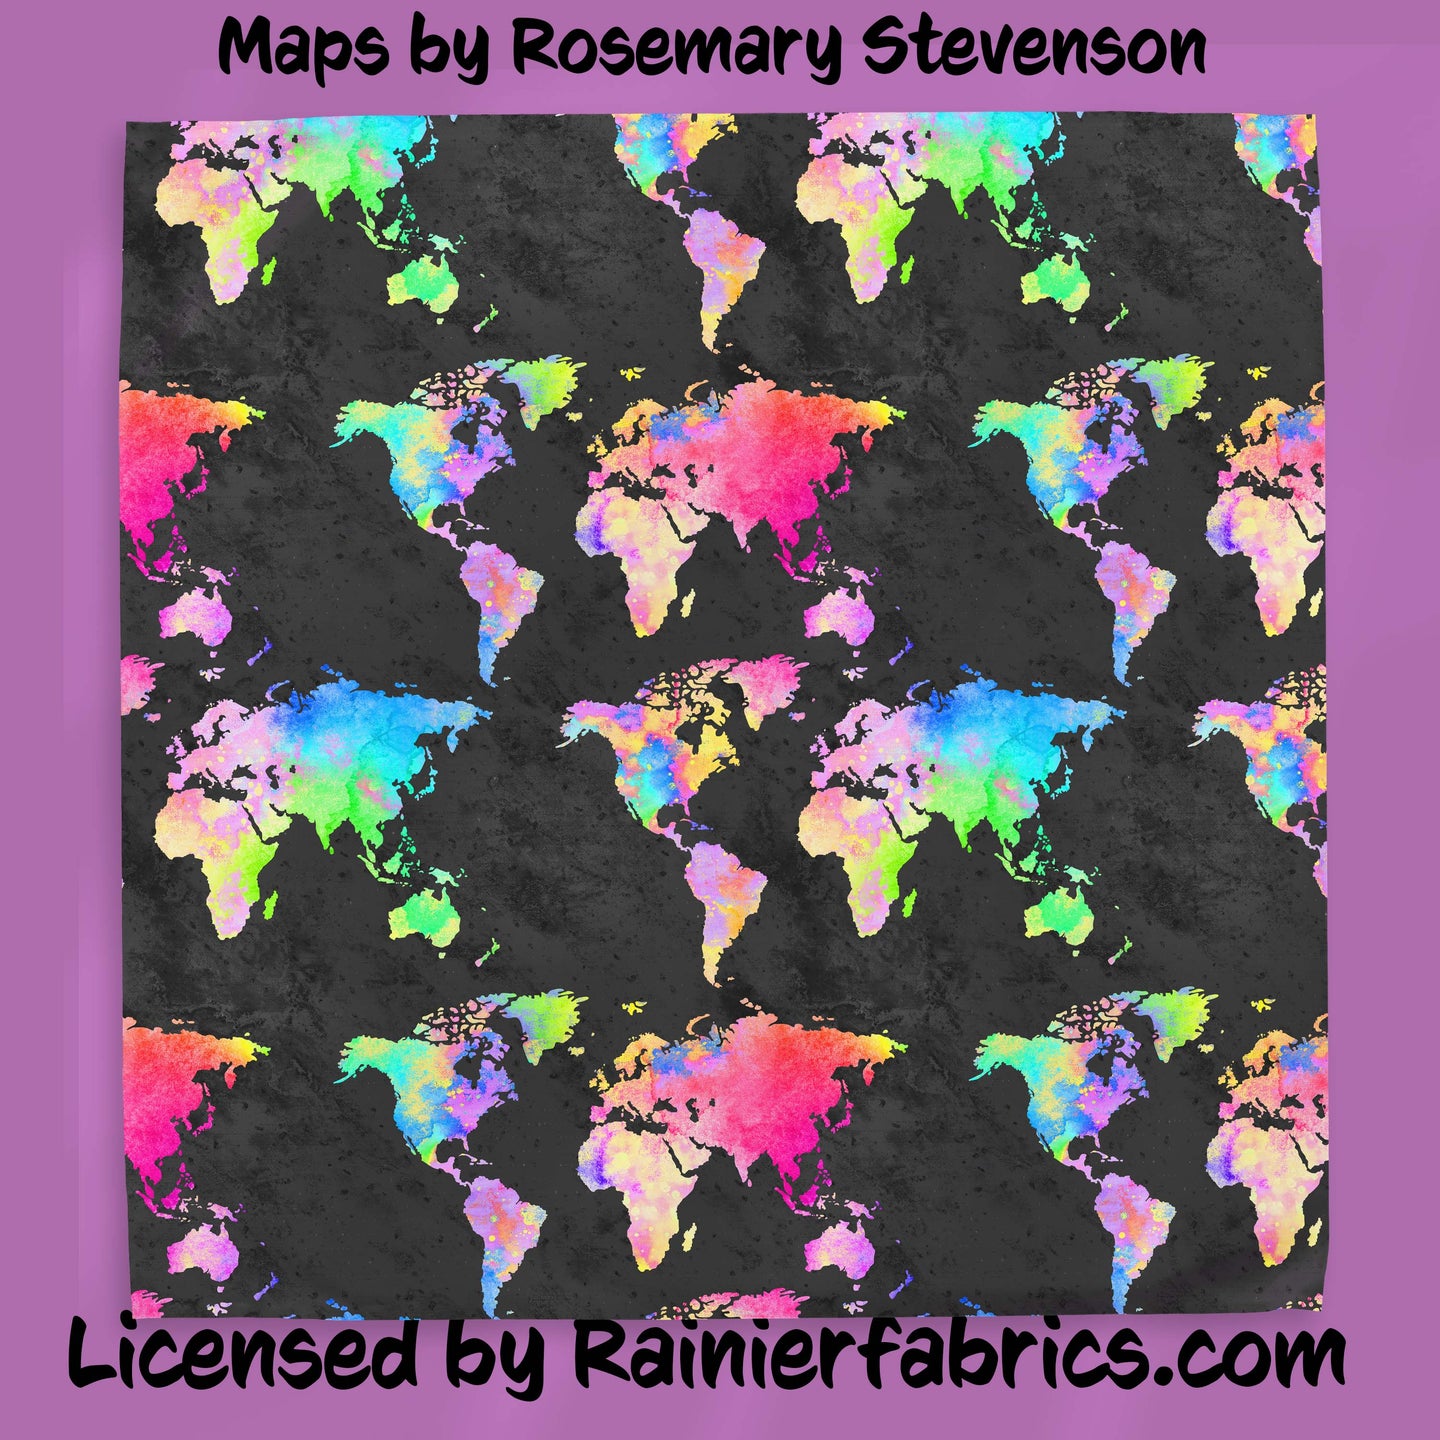 Maps by Rosemary Stevenson- 2-5 day turnaround - Order by 1/2 yard; Description of bases below